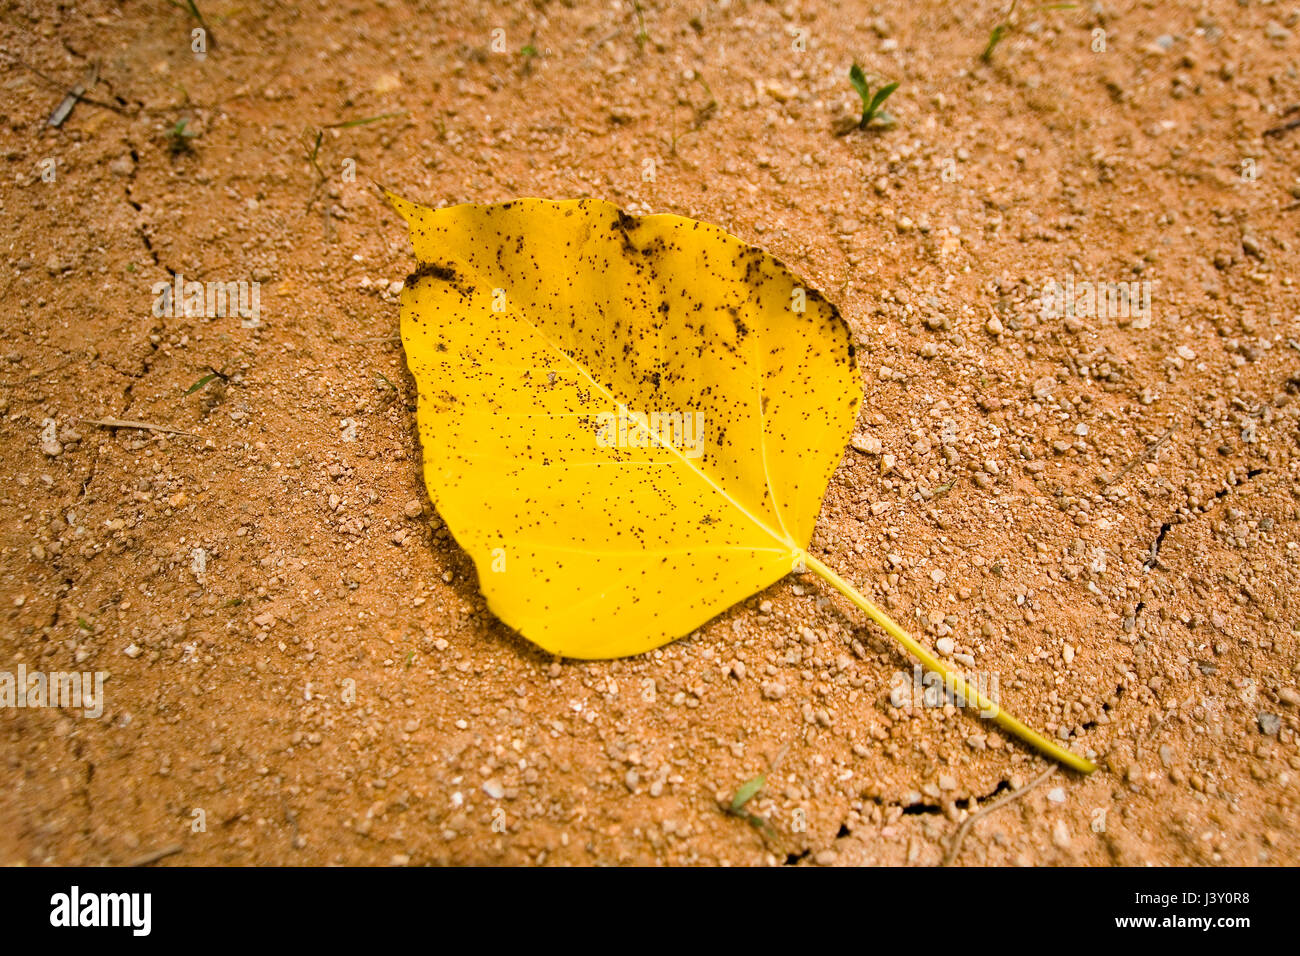 Drought. Yellow leaf with black specks lies on dry ground. Stock Photo